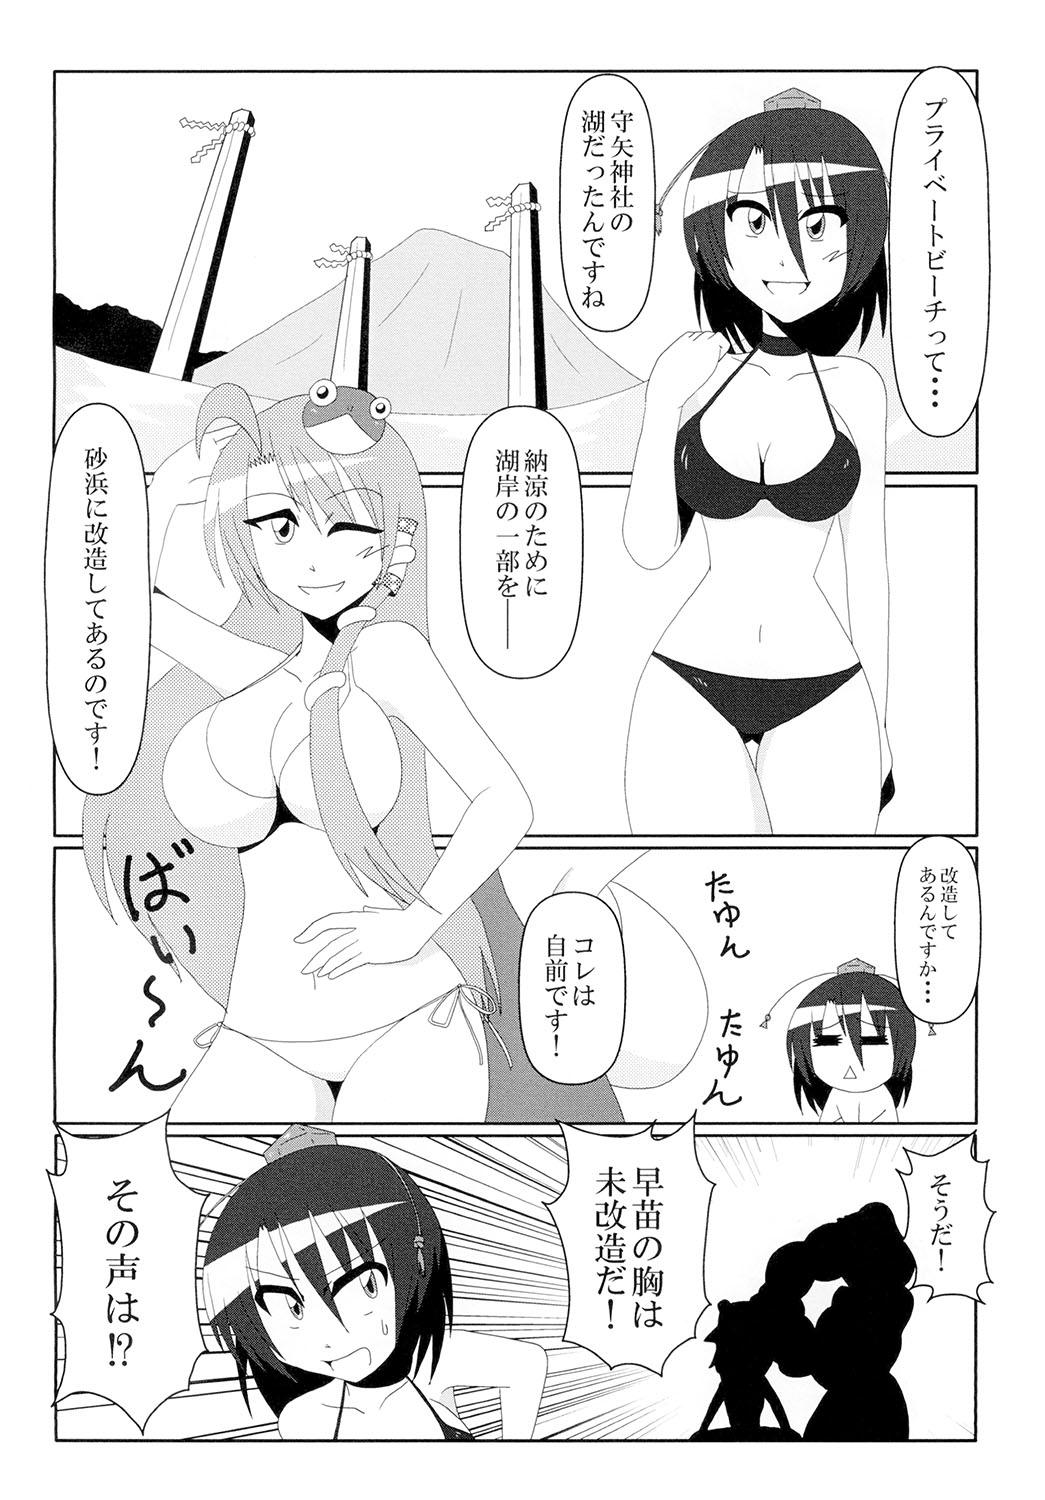 Full Movie とくに理由のない乳ポロリが妖怪の山を襲う! - Touhou project Twink - Page 6